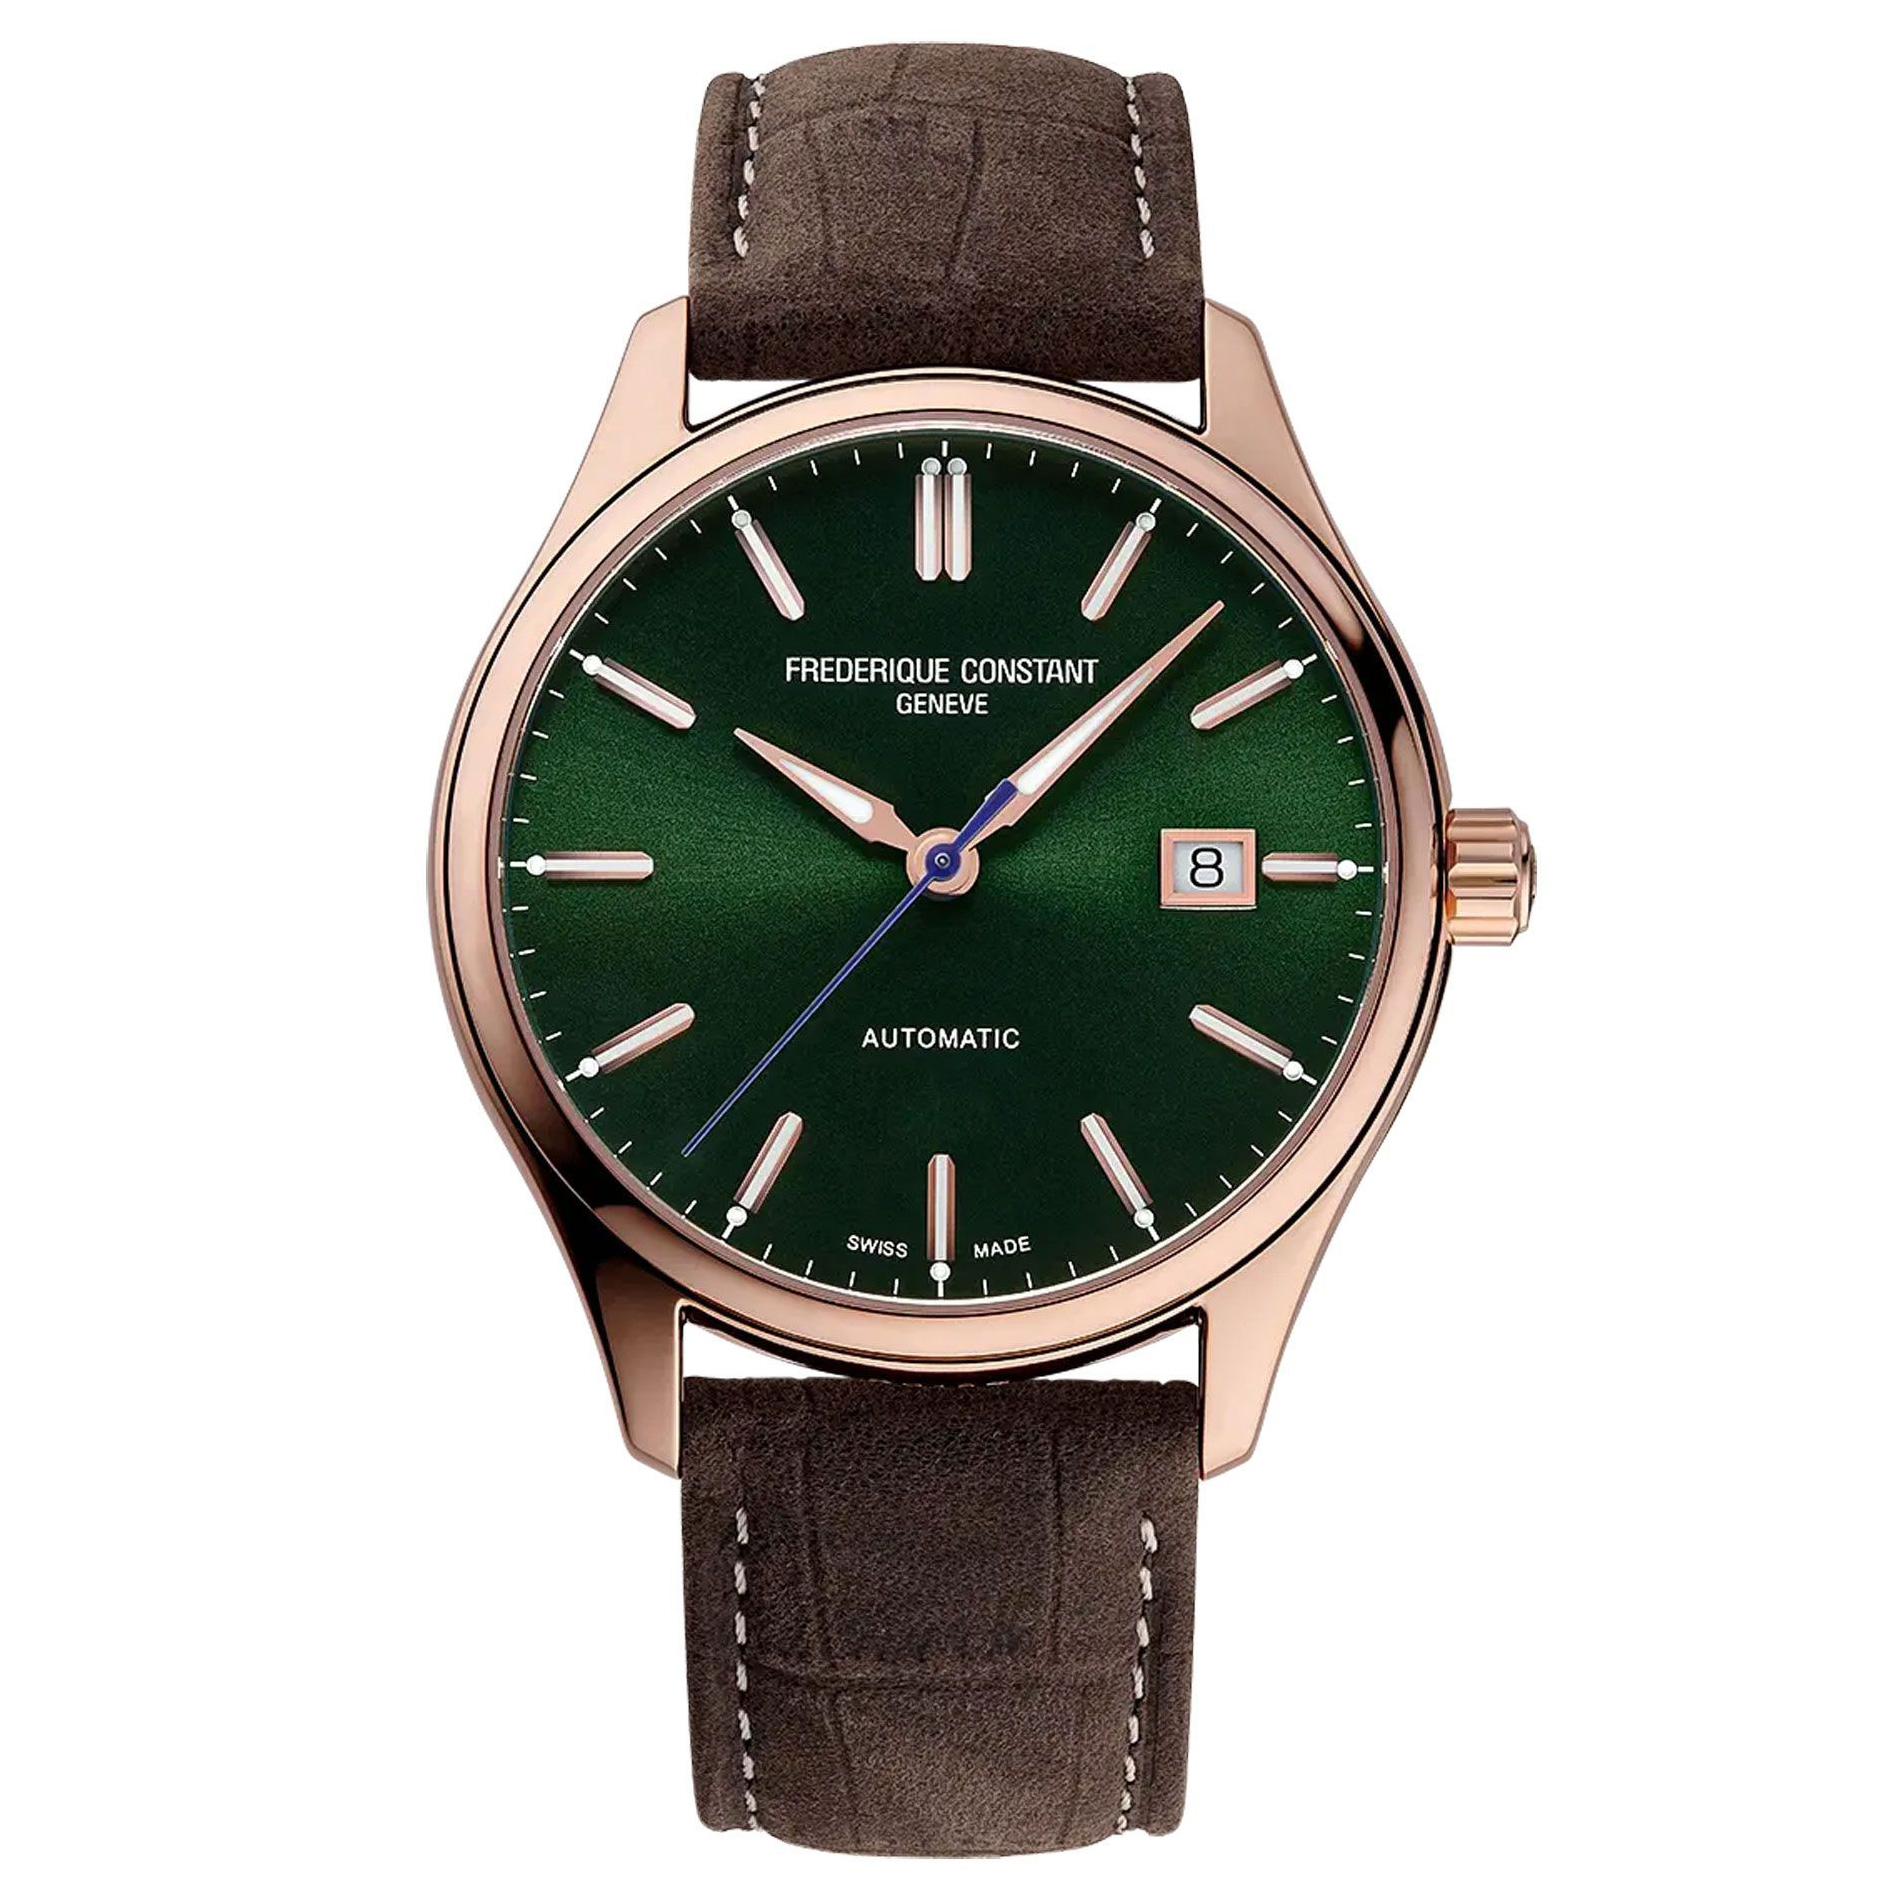 Frederique Constant Classics Index Green Dial Brown Leather Strap Watch 40mm - FC-303GR5B4